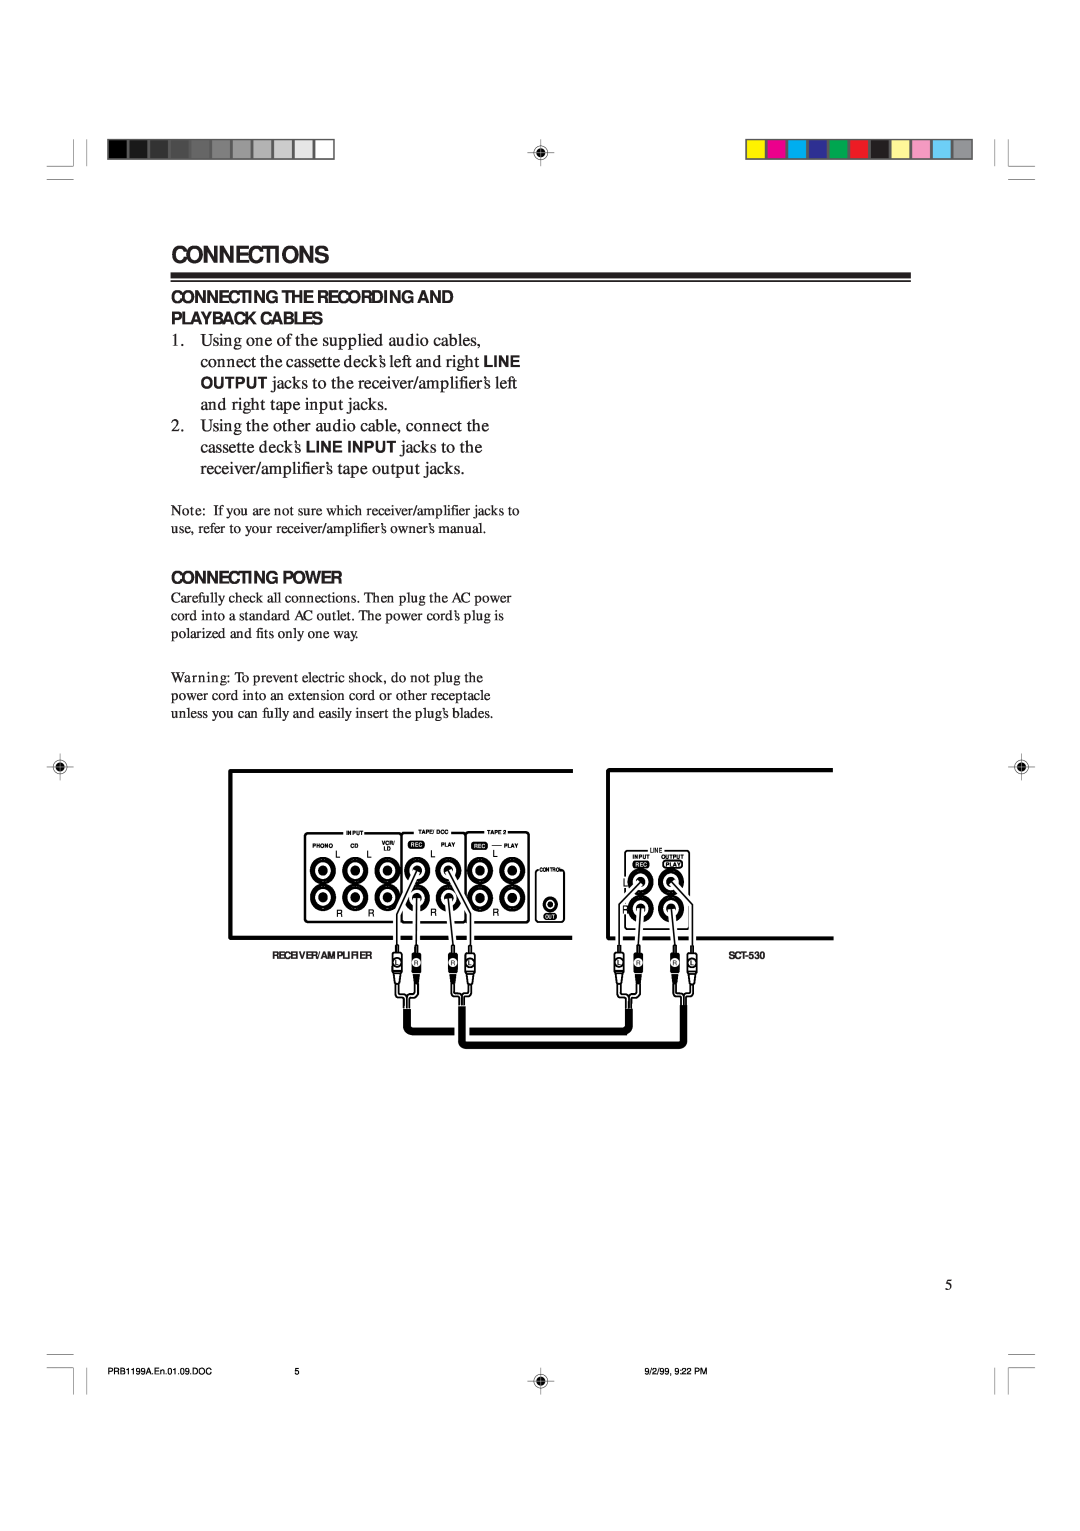 RCA SCT-530 owner manual Connections, Connecting The Recording And Playback Cables, Connecting Power 